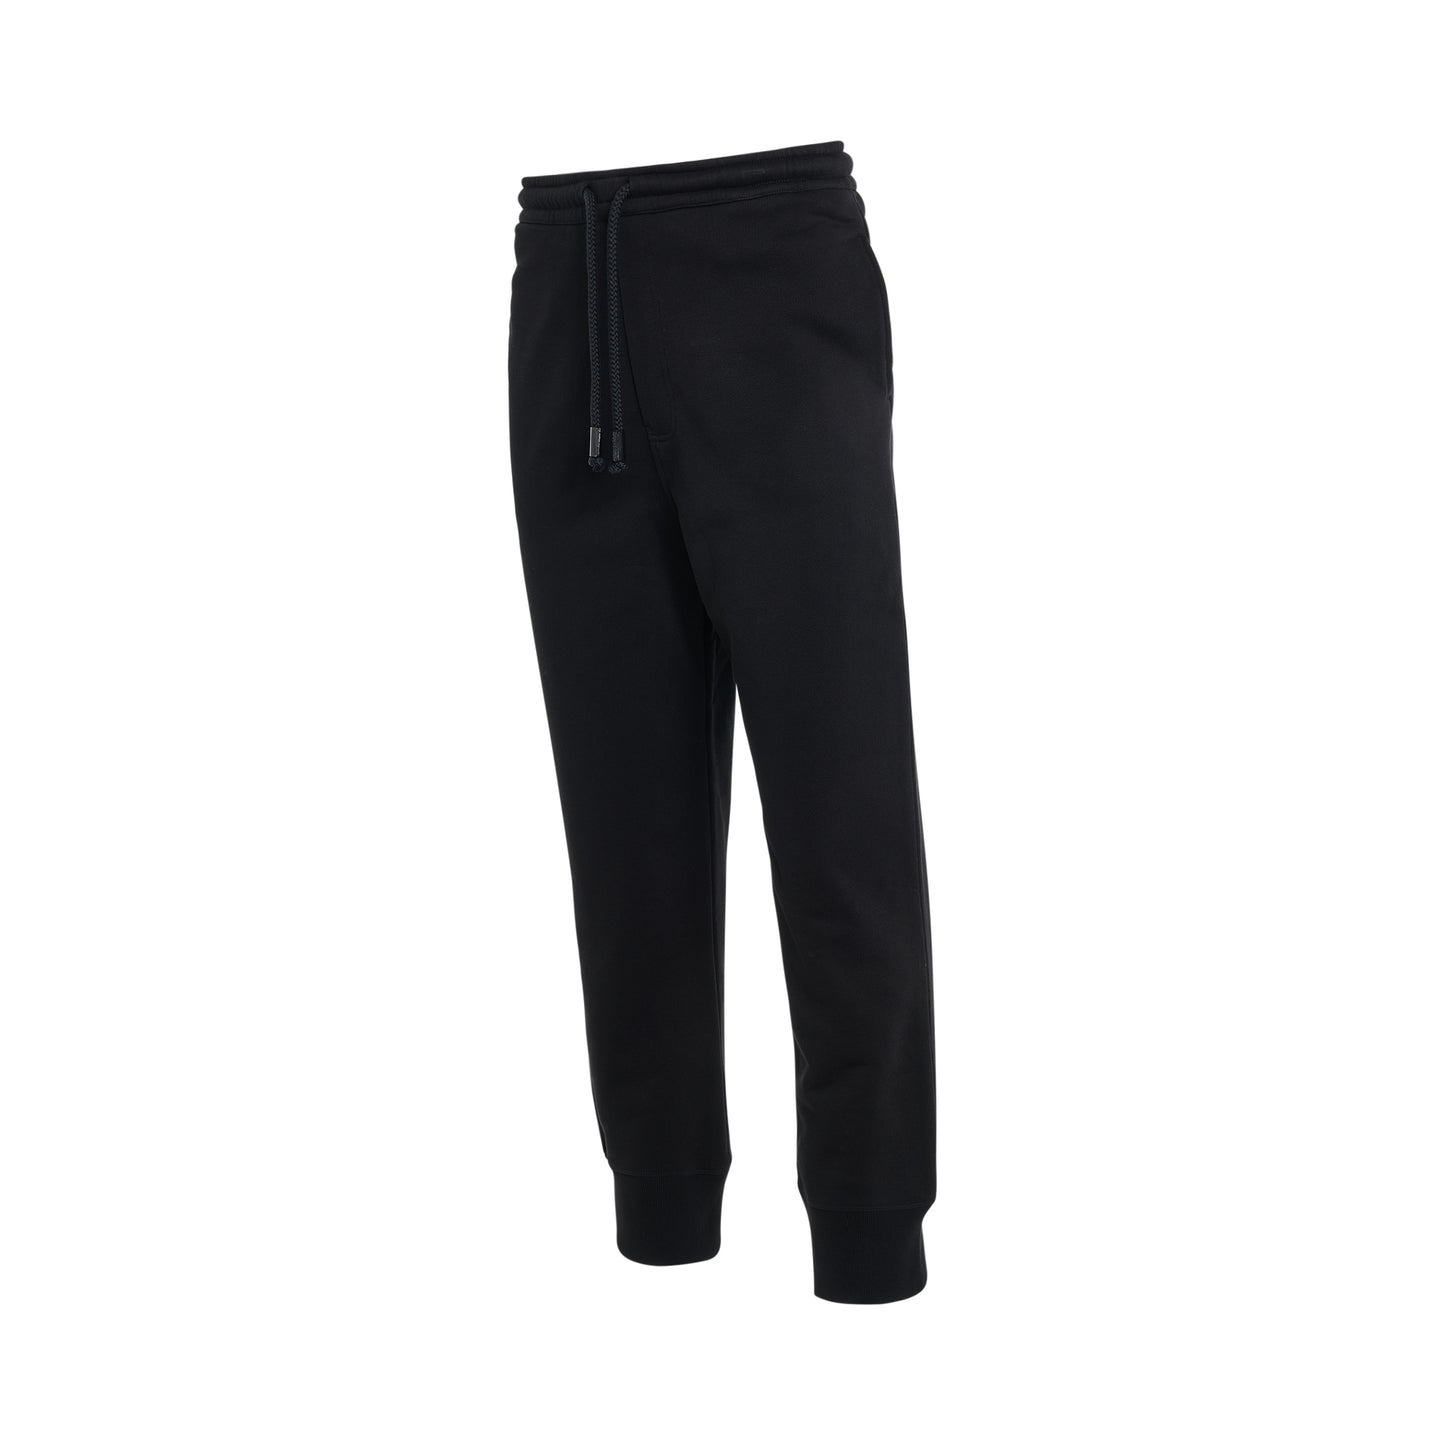 Relax Fit Sweatpants in Black